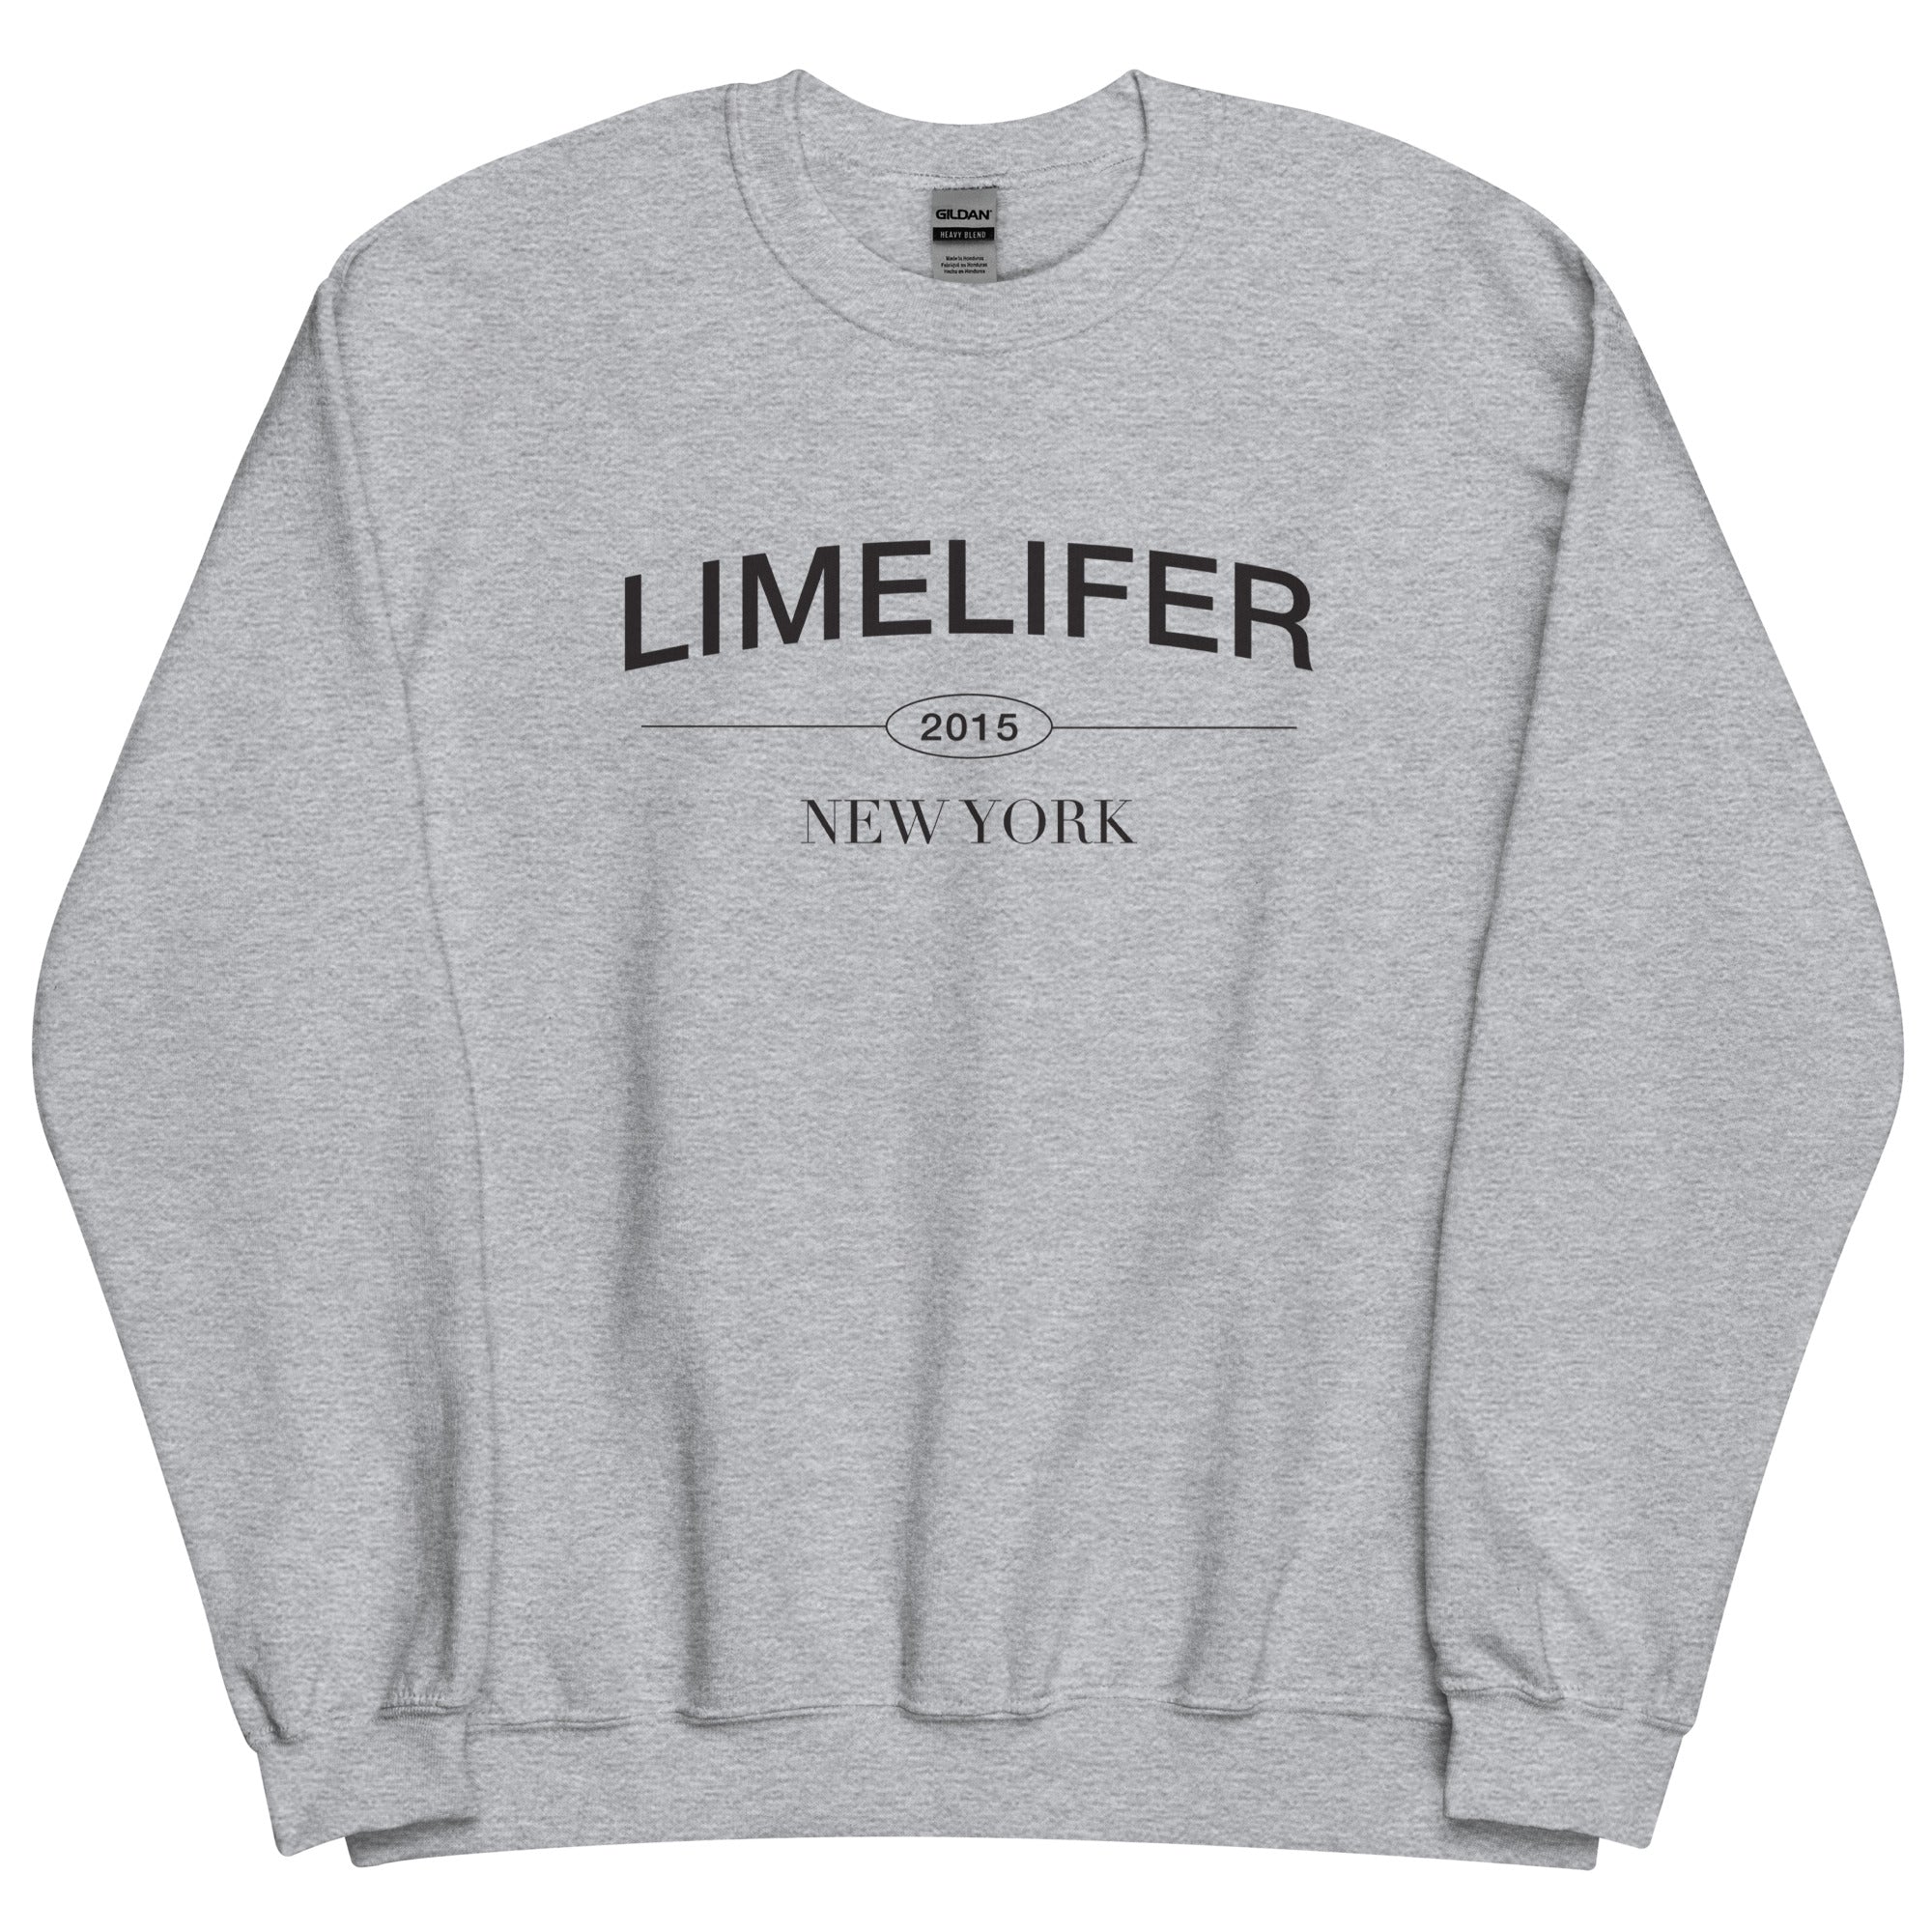 LIMELIFER NY - Unisex Sweatshirt in Sport Grey and White